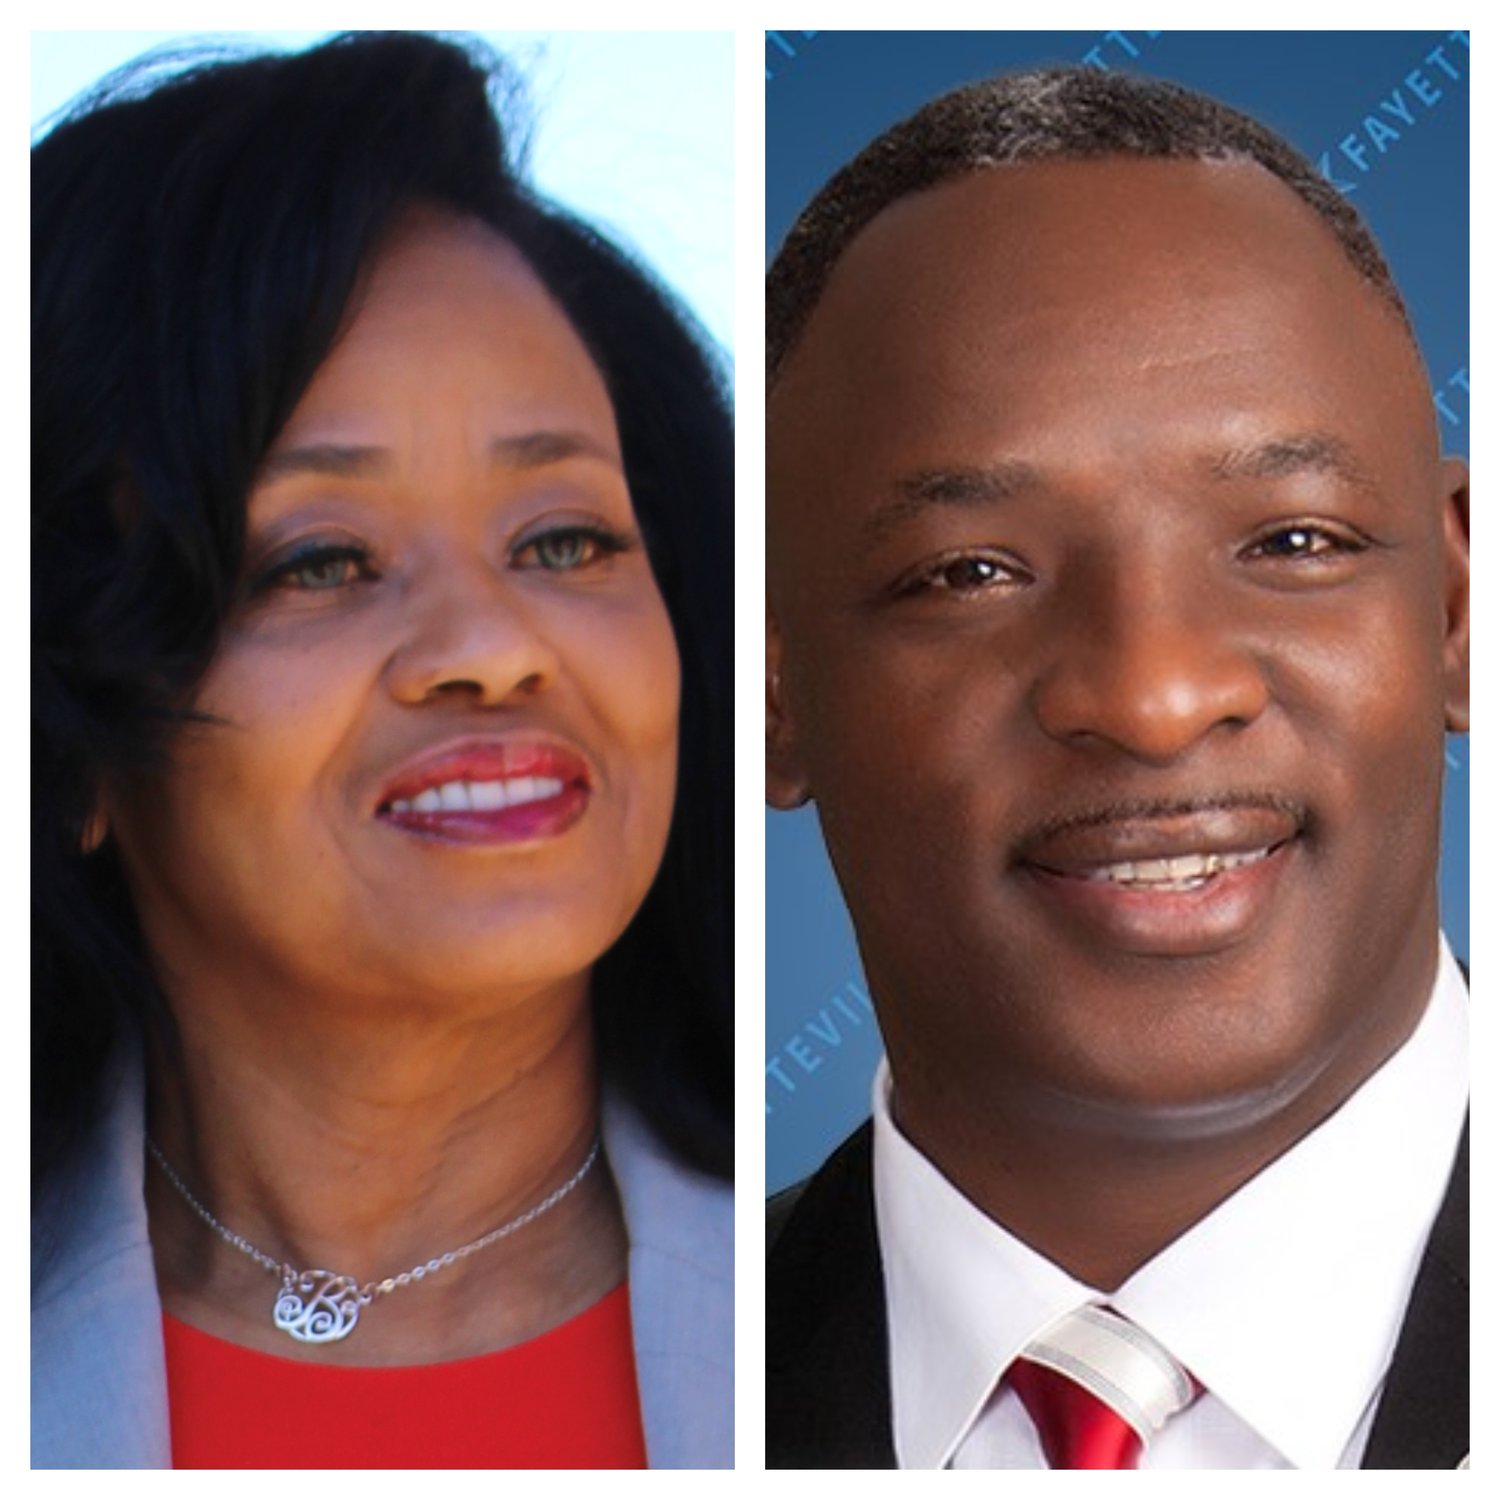 Brenda McNair and Larry O. Wright Sr. are candidates for the District 7 seat on the Fayetteville City Council.